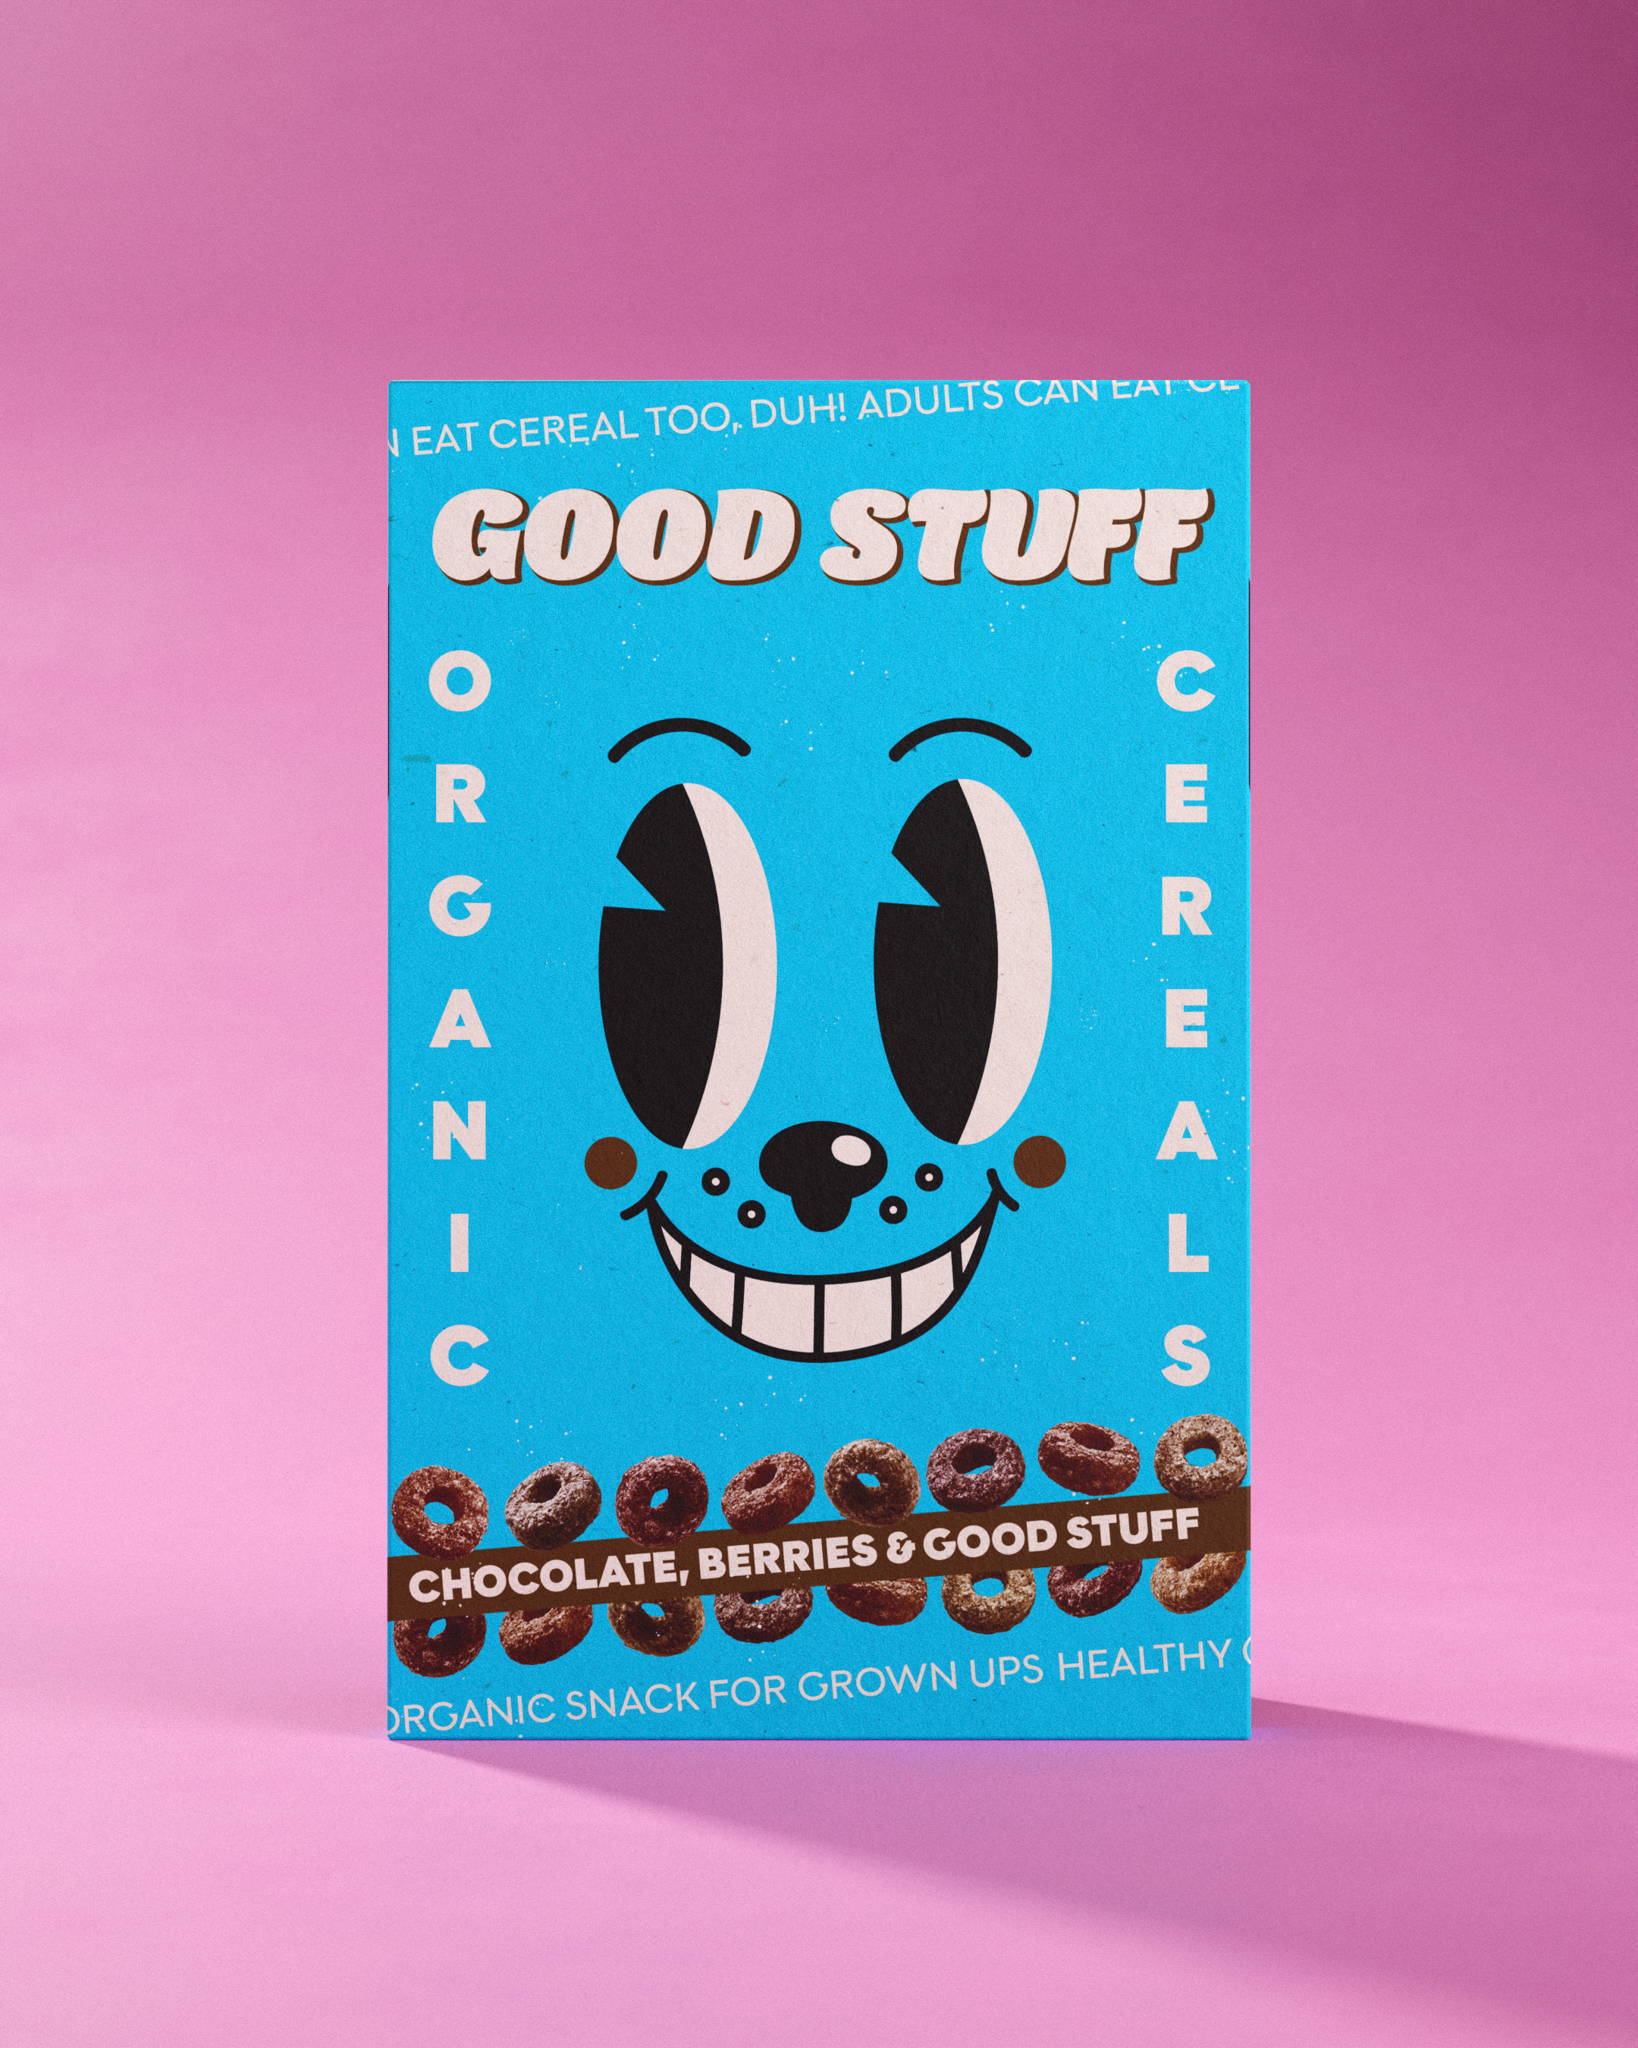 Good Stuff Cereal Is Bringing Adults Back to Eating A Morning Staple